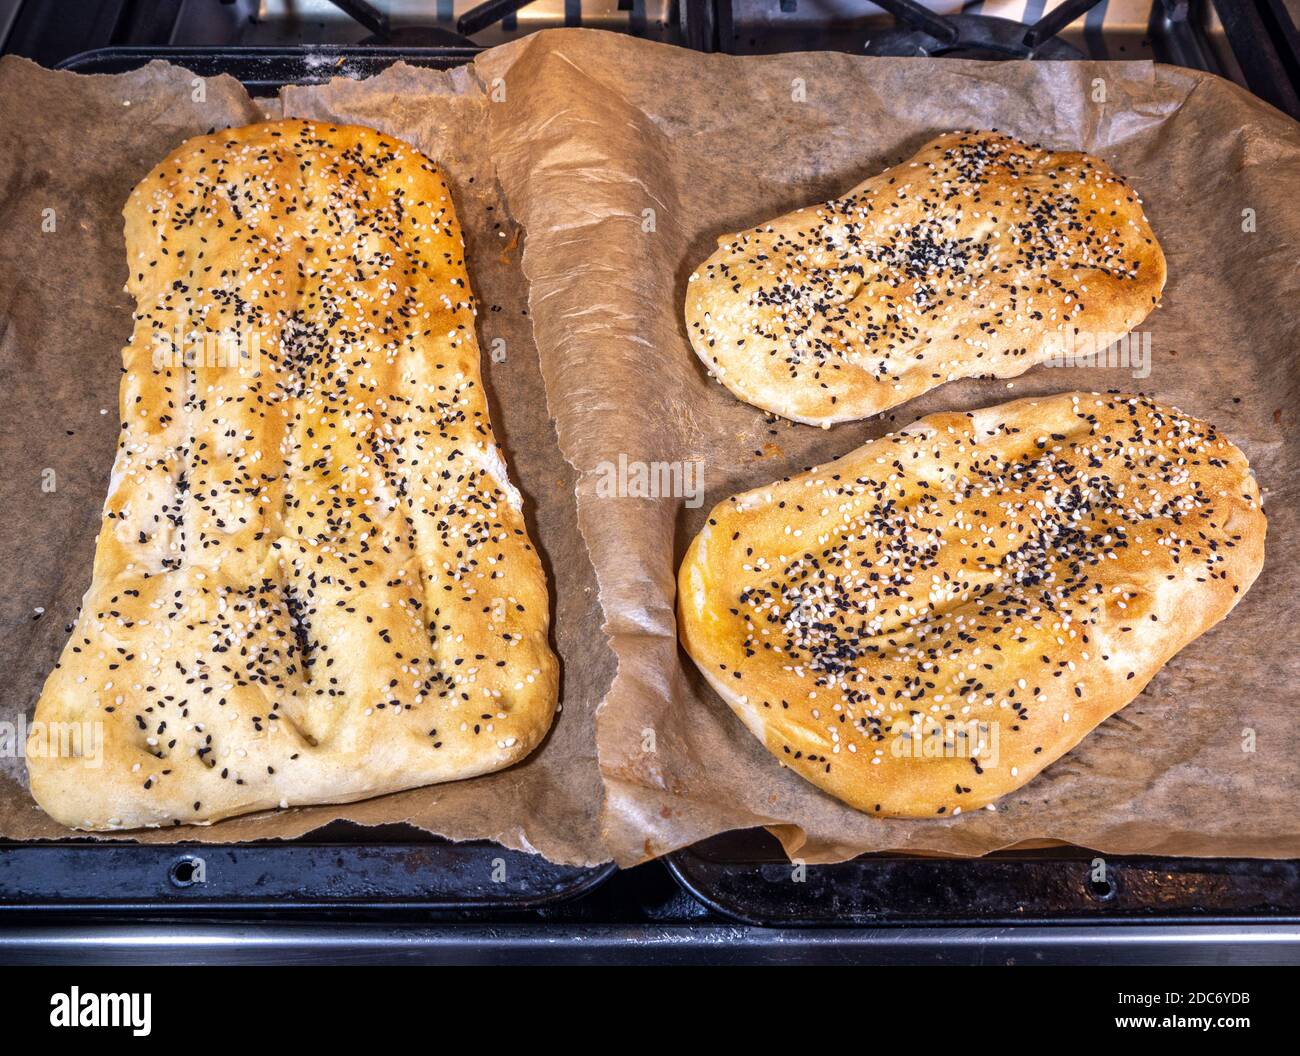 Hot pieces of Persian barbari flatbread (yeast leavened Iranian flatbread), topped with nigella and sesame seeds, on sheets of baking parchment. Stock Photo